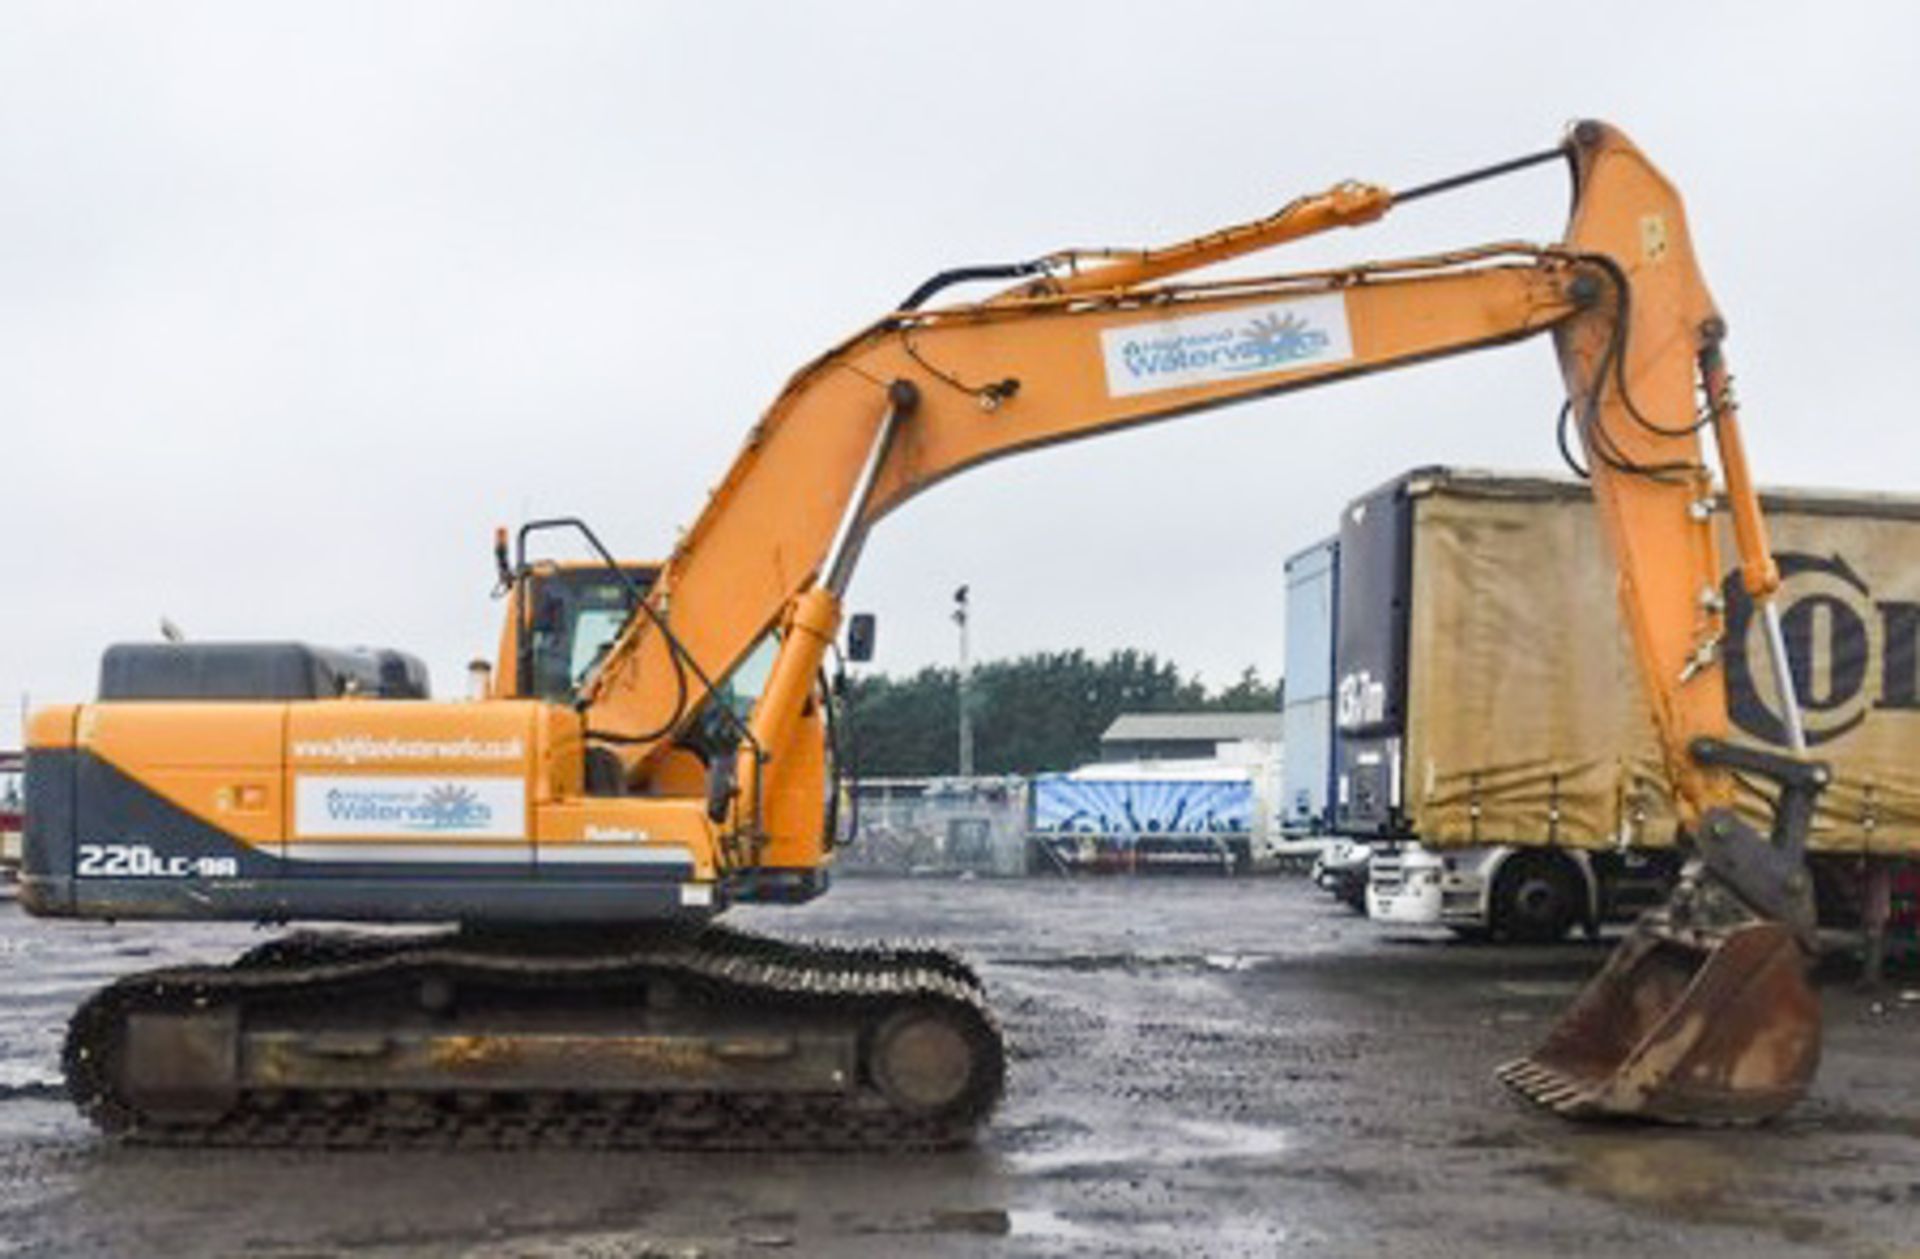 2014 HYUNDAI RC220 LC9A, S/N 359, 2340HRS (NOT VERIFIED), 1 BUCKET, MAX REACH 10M, HYD LINES FOR PIP - Image 12 of 17